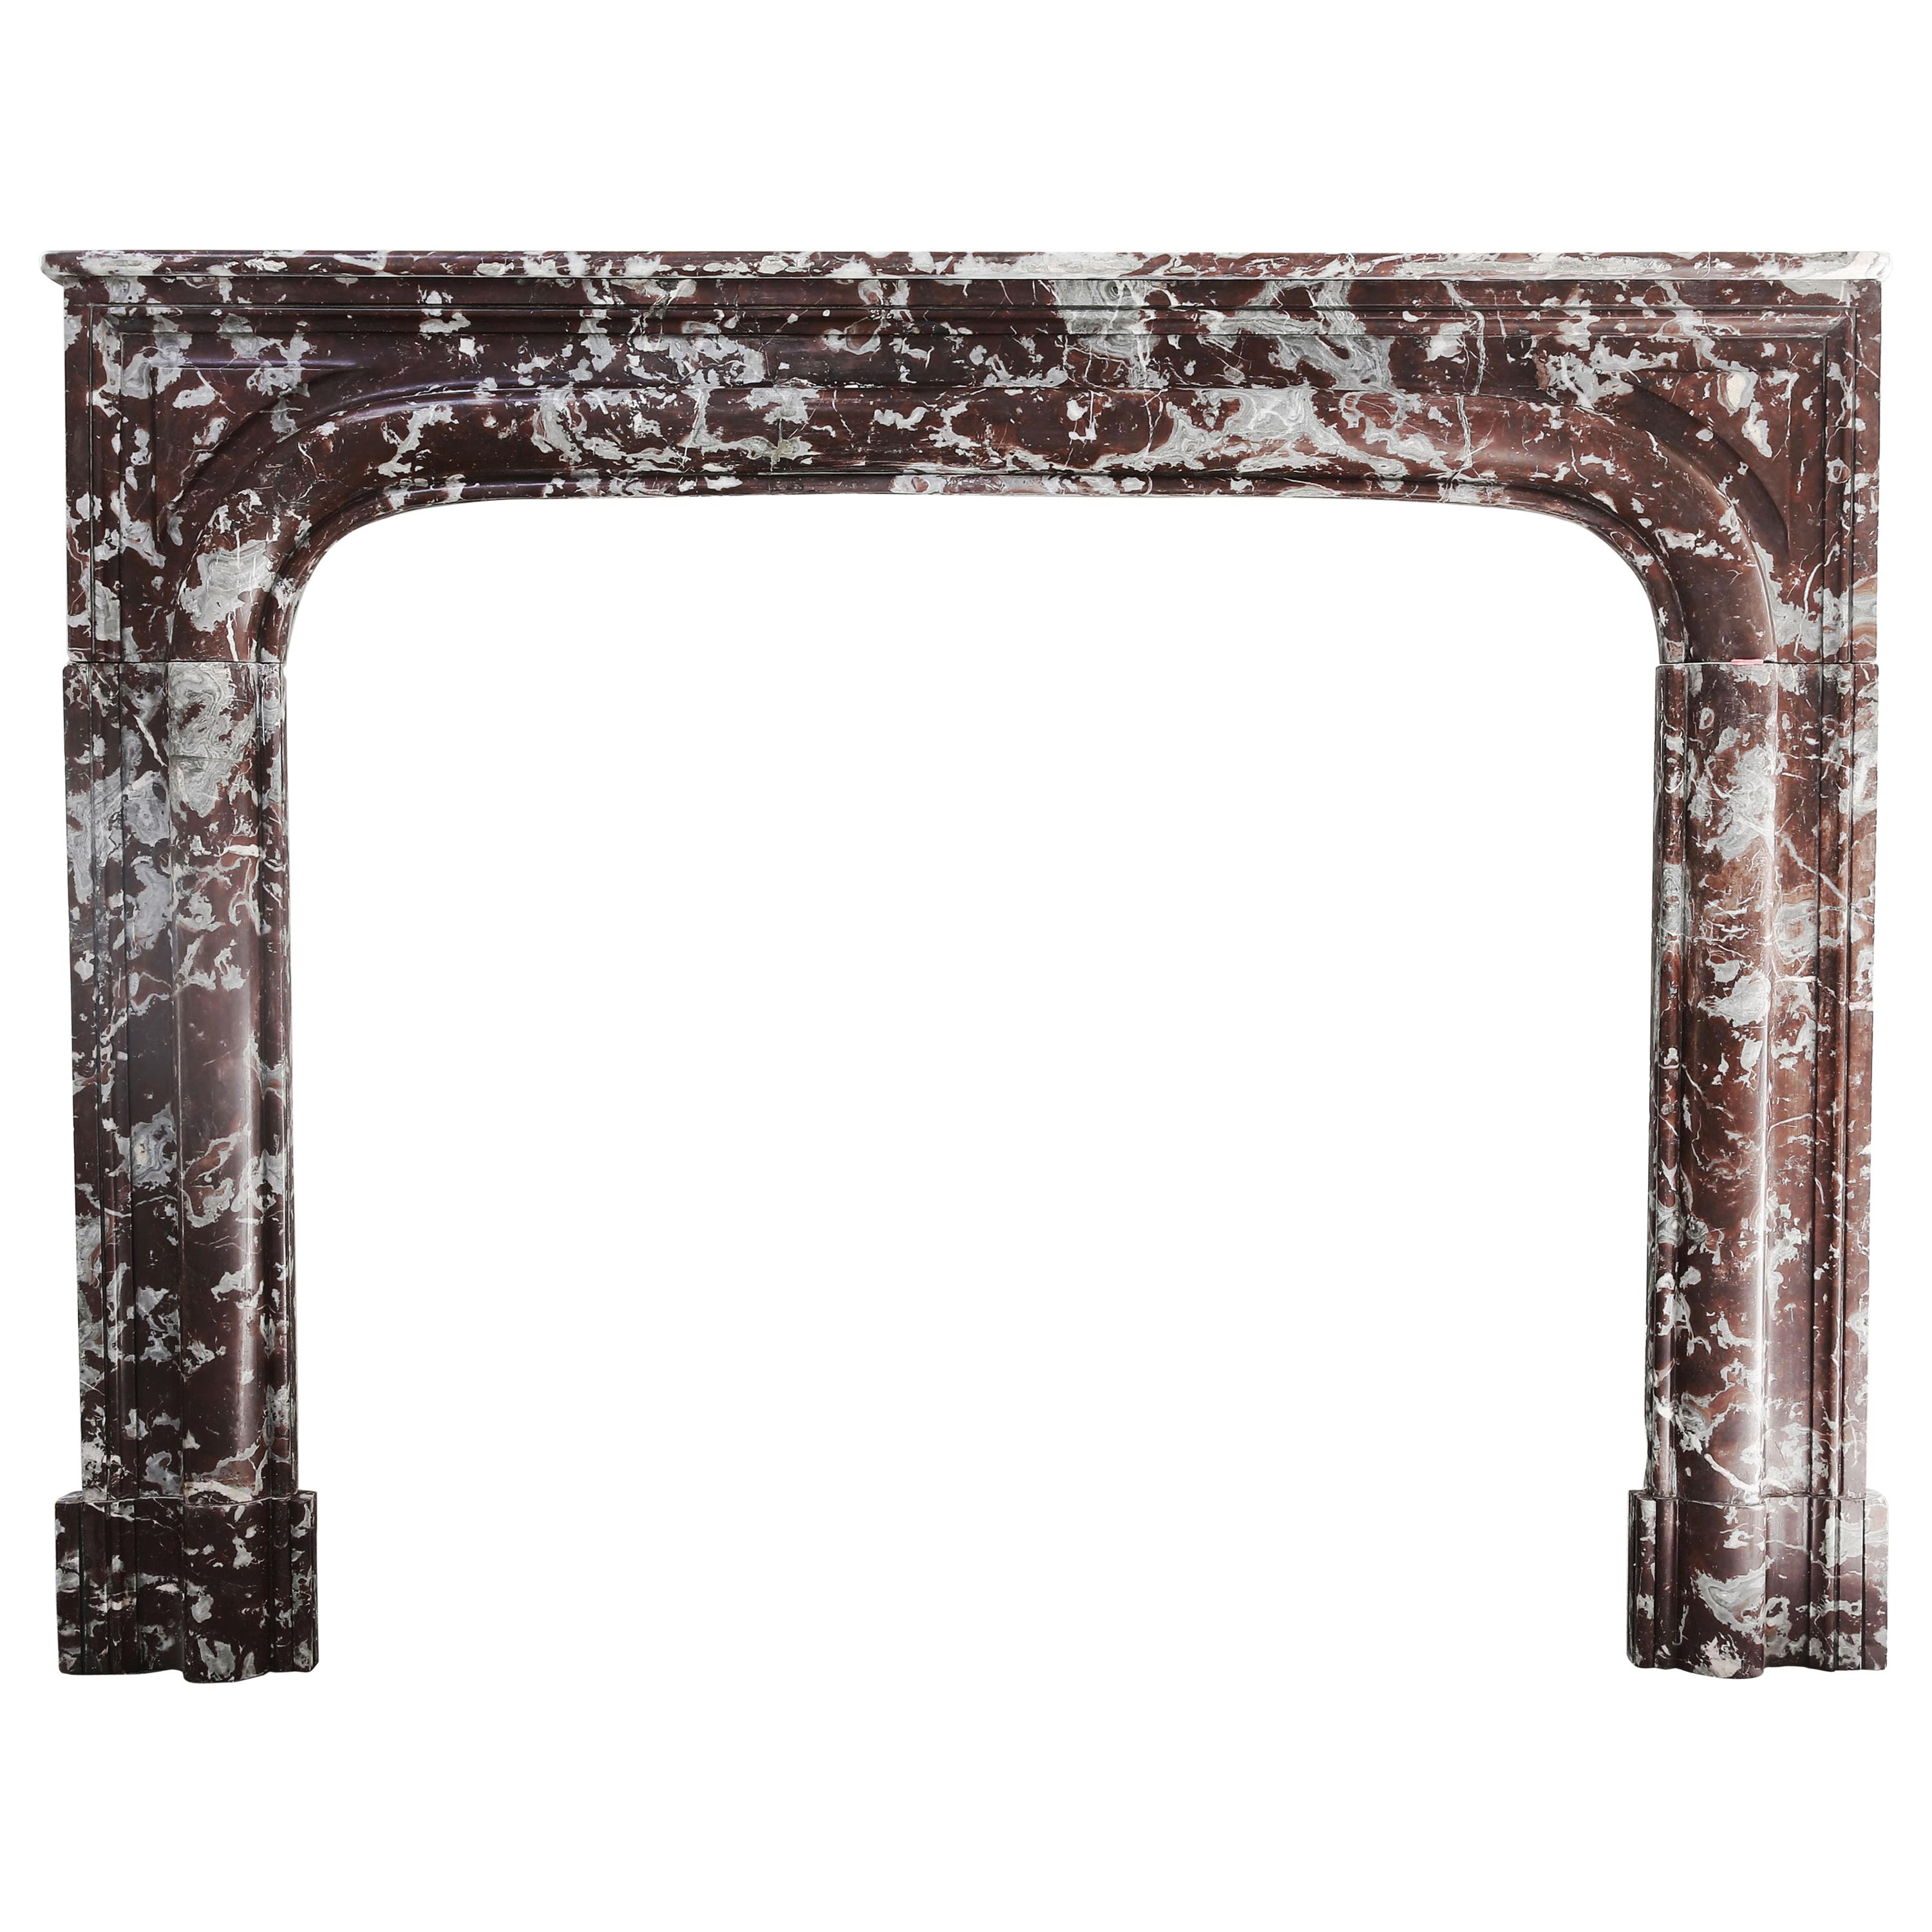 Antique Marble Stone Fireplace from the 19th Century, Louis XIV Style